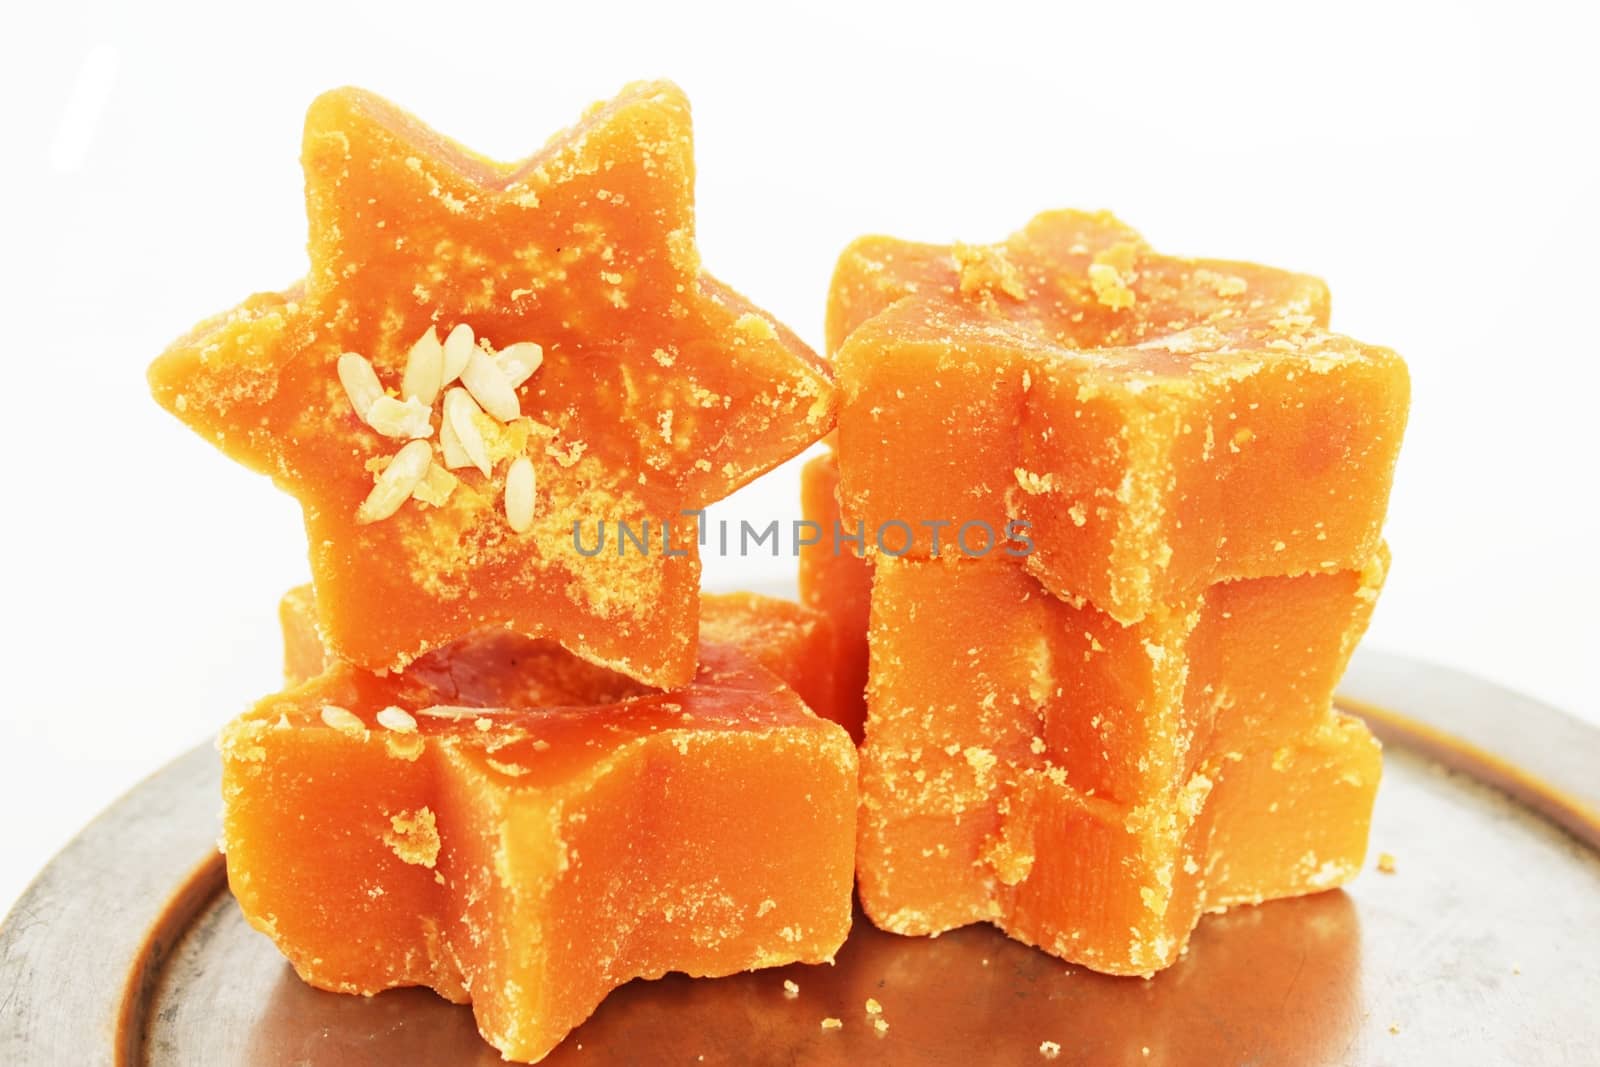 Hard molasses or jaggery derived from sugarcane juice, in star shape and garnished with melon seeds. Also known as gur, it is preferred as a healthier sweetener across Asia, as against white sugar. Usable in culinary and health concepts.
